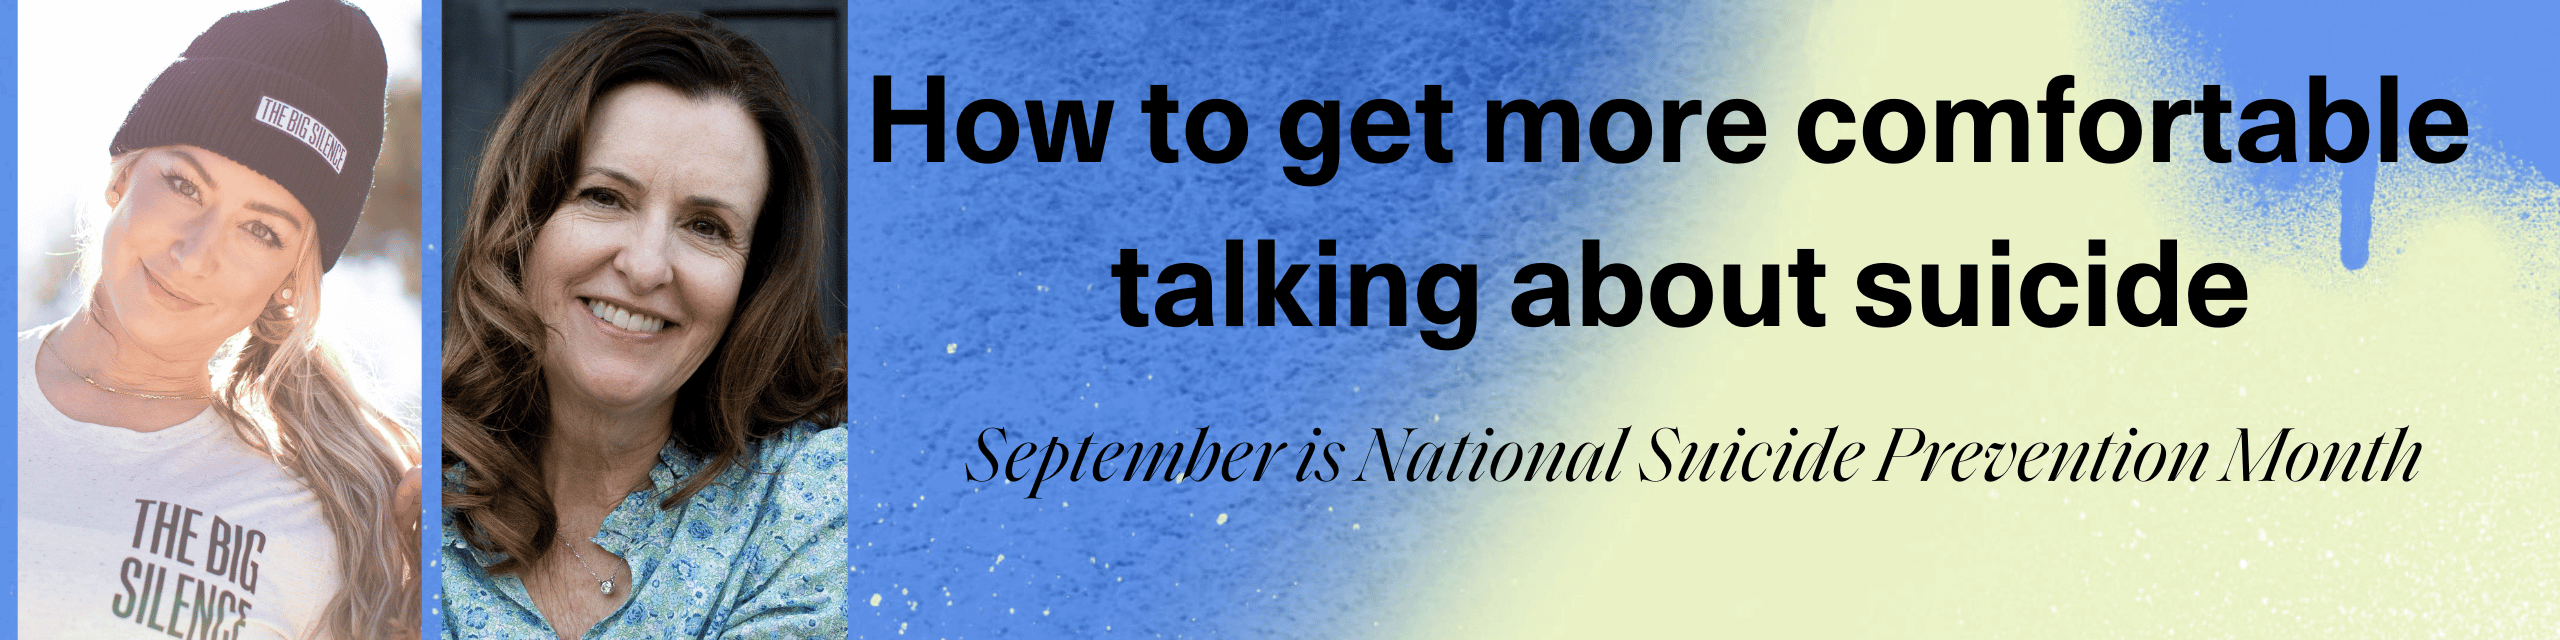 How to Get More Comfortable Talking about Suicide with #DebbieDaily - Suicide Prevention Awareness Month